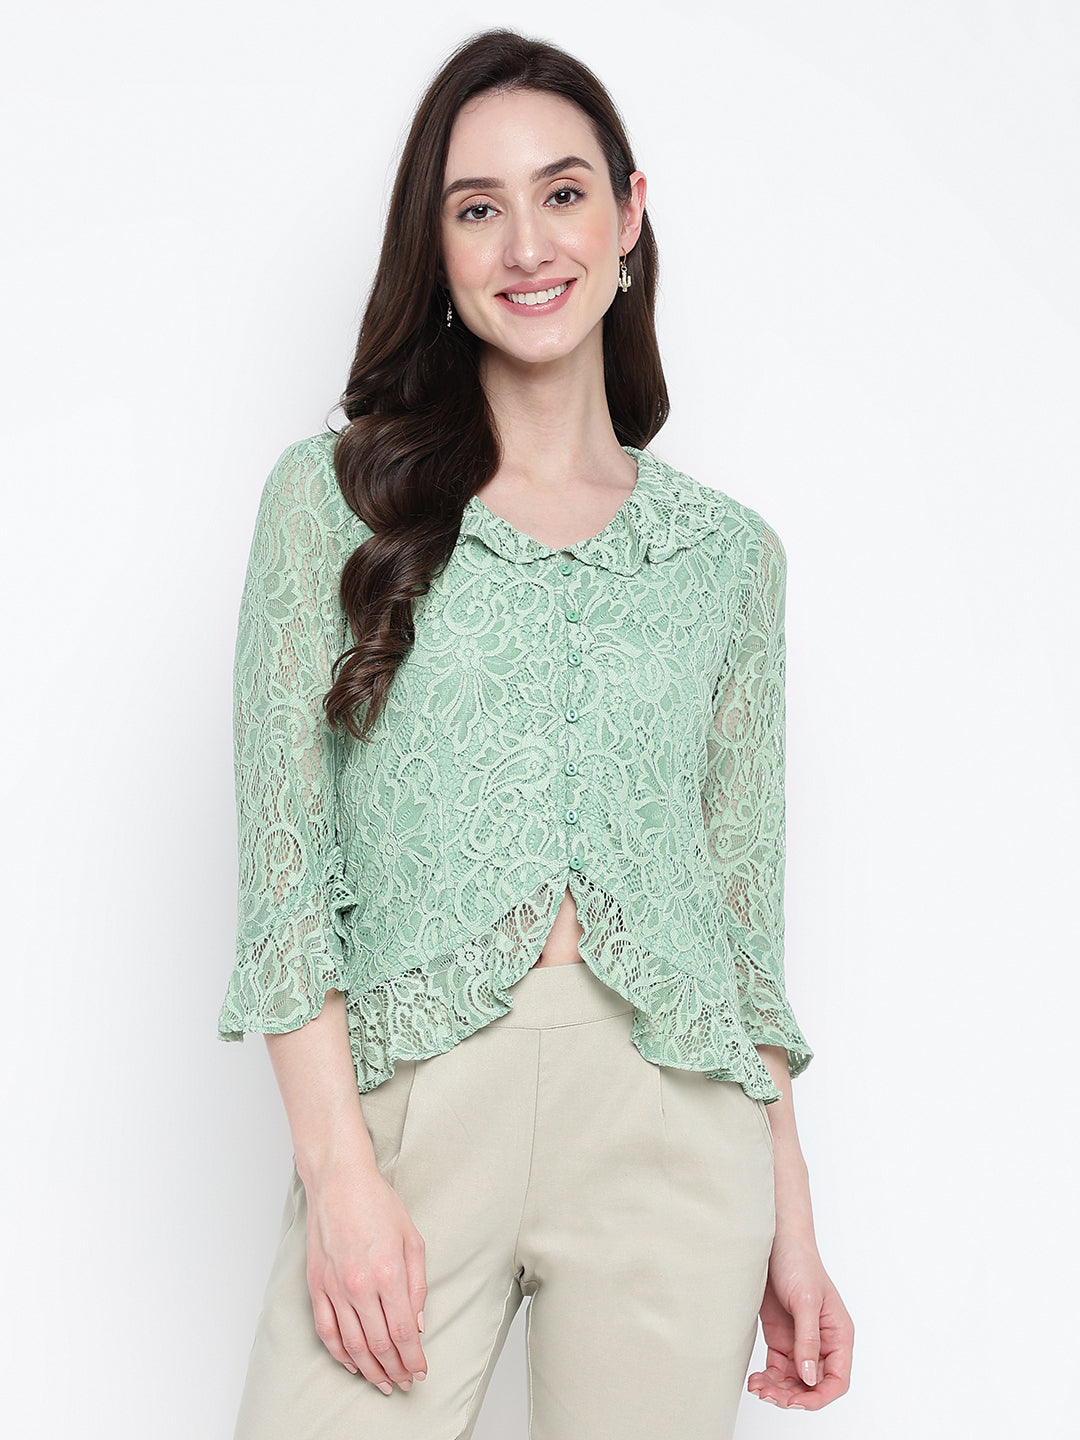 Green 3/4 Sleeve Solid Top Knit Top